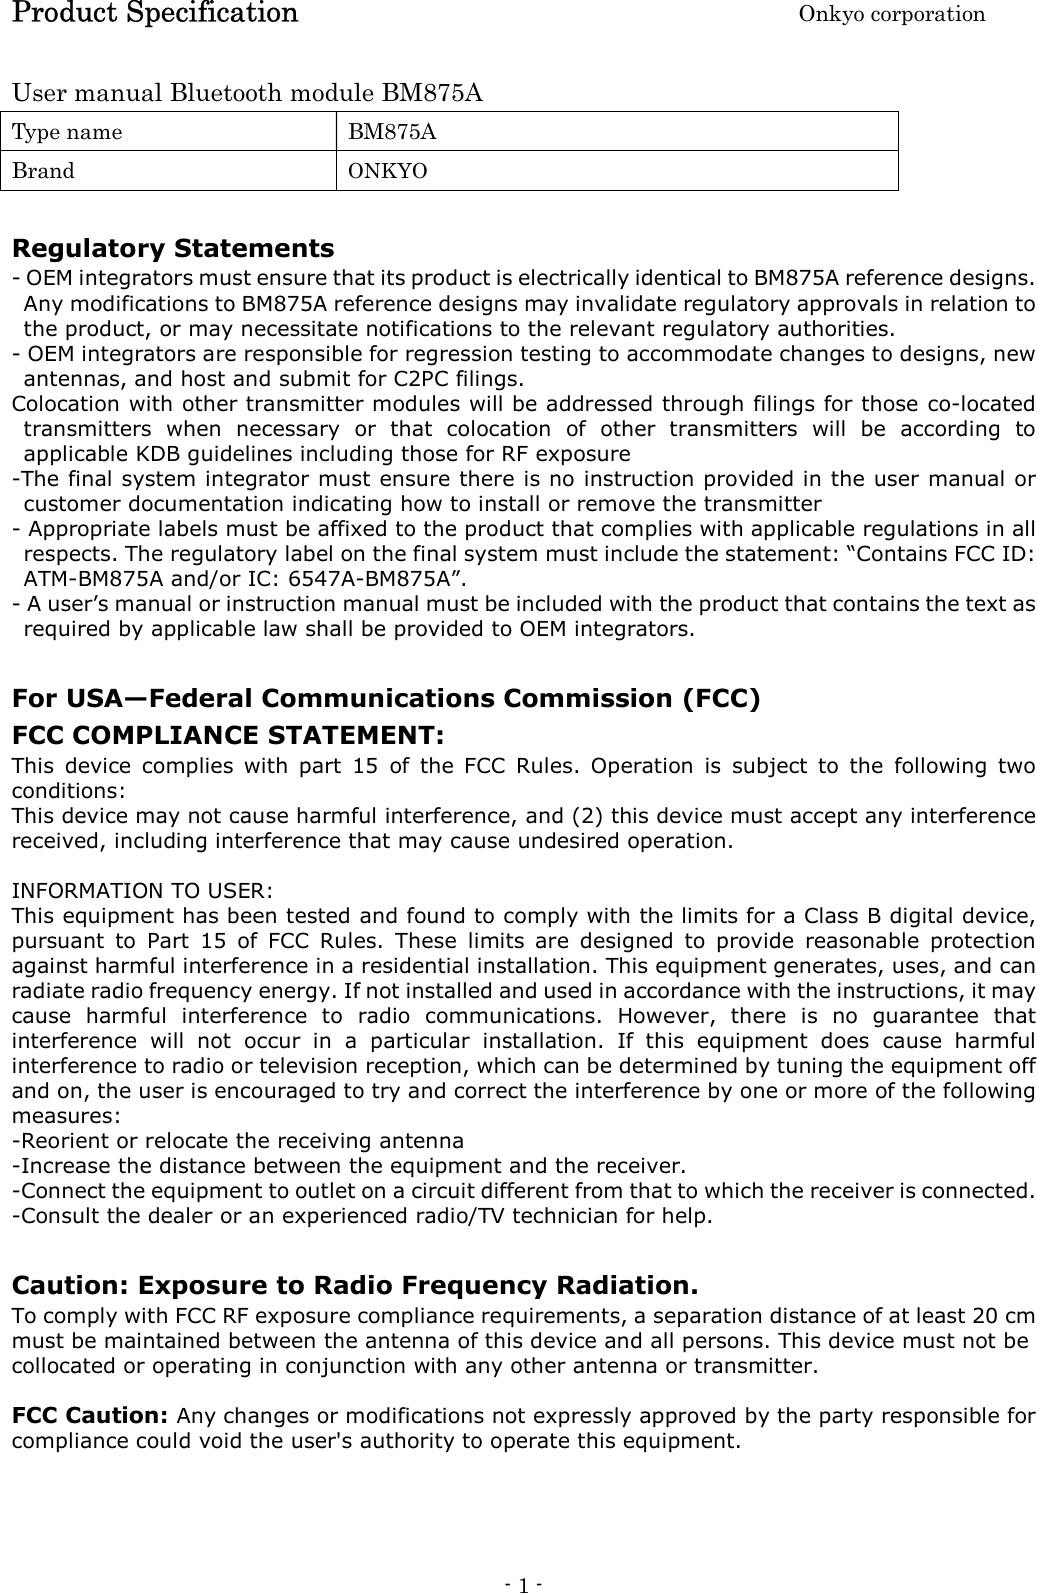 Product Specification    Onkyo corporation - 1 -   User manual Bluetooth module BM875A Type name  BM875A Brand  ONKYO  Regulatory Statements - OEM integrators must ensure that its product is electrically identical to BM875A reference designs. Any modifications to BM875A reference designs may invalidate regulatory approvals in relation to the product, or may necessitate notifications to the relevant regulatory authorities. - OEM integrators are responsible for regression testing to accommodate changes to designs, new antennas, and host and submit for C2PC filings.   Colocation with other transmitter modules will be addressed through filings for those co-located transmitters  when  necessary  or  that  colocation  of  other  transmitters  will  be  according  to applicable KDB guidelines including those for RF exposure -The final system integrator must ensure there is no instruction provided in the user manual or customer documentation indicating how to install or remove the transmitter - Appropriate labels must be affixed to the product that complies with applicable regulations in all respects. The regulatory label on the final system must include the statement: “Contains FCC ID: ATM-BM875A and/or IC: 6547A-BM875A”. - A user’s manual or instruction manual must be included with the product that contains the text as required by applicable law shall be provided to OEM integrators.    For USA—Federal Communications Commission (FCC) FCC COMPLIANCE STATEMENT: This  device  complies  with  part  15  of  the  FCC  Rules.  Operation  is  subject  to  the  following  two conditions: This device may not cause harmful interference, and (2) this device must accept any interference received, including interference that may cause undesired operation.  INFORMATION TO USER: This equipment has been tested and found to comply with the limits for a Class B digital device, pursuant  to  Part  15  of  FCC  Rules.  These  limits  are  designed  to  provide  reasonable  protection against harmful interference in a residential installation. This equipment generates, uses, and can radiate radio frequency energy. If not installed and used in accordance with the instructions, it may cause  harmful  interference  to  radio  communications.  However,  there  is  no  guarantee  that interference  will  not  occur  in  a  particular  installation.  If  this  equipment  does  cause  harmful interference to radio or television reception, which can be determined by tuning the equipment off and on, the user is encouraged to try and correct the interference by one or more of the following measures: -Reorient or relocate the receiving antenna -Increase the distance between the equipment and the receiver. -Connect the equipment to outlet on a circuit different from that to which the receiver is connected. -Consult the dealer or an experienced radio/TV technician for help.  Caution: Exposure to Radio Frequency Radiation.   To comply with FCC RF exposure compliance requirements, a separation distance of at least 20 cm must be maintained between the antenna of this device and all persons. This device must not be collocated or operating in conjunction with any other antenna or transmitter.  FCC Caution: Any changes or modifications not expressly approved by the party responsible for compliance could void the user&apos;s authority to operate this equipment.    